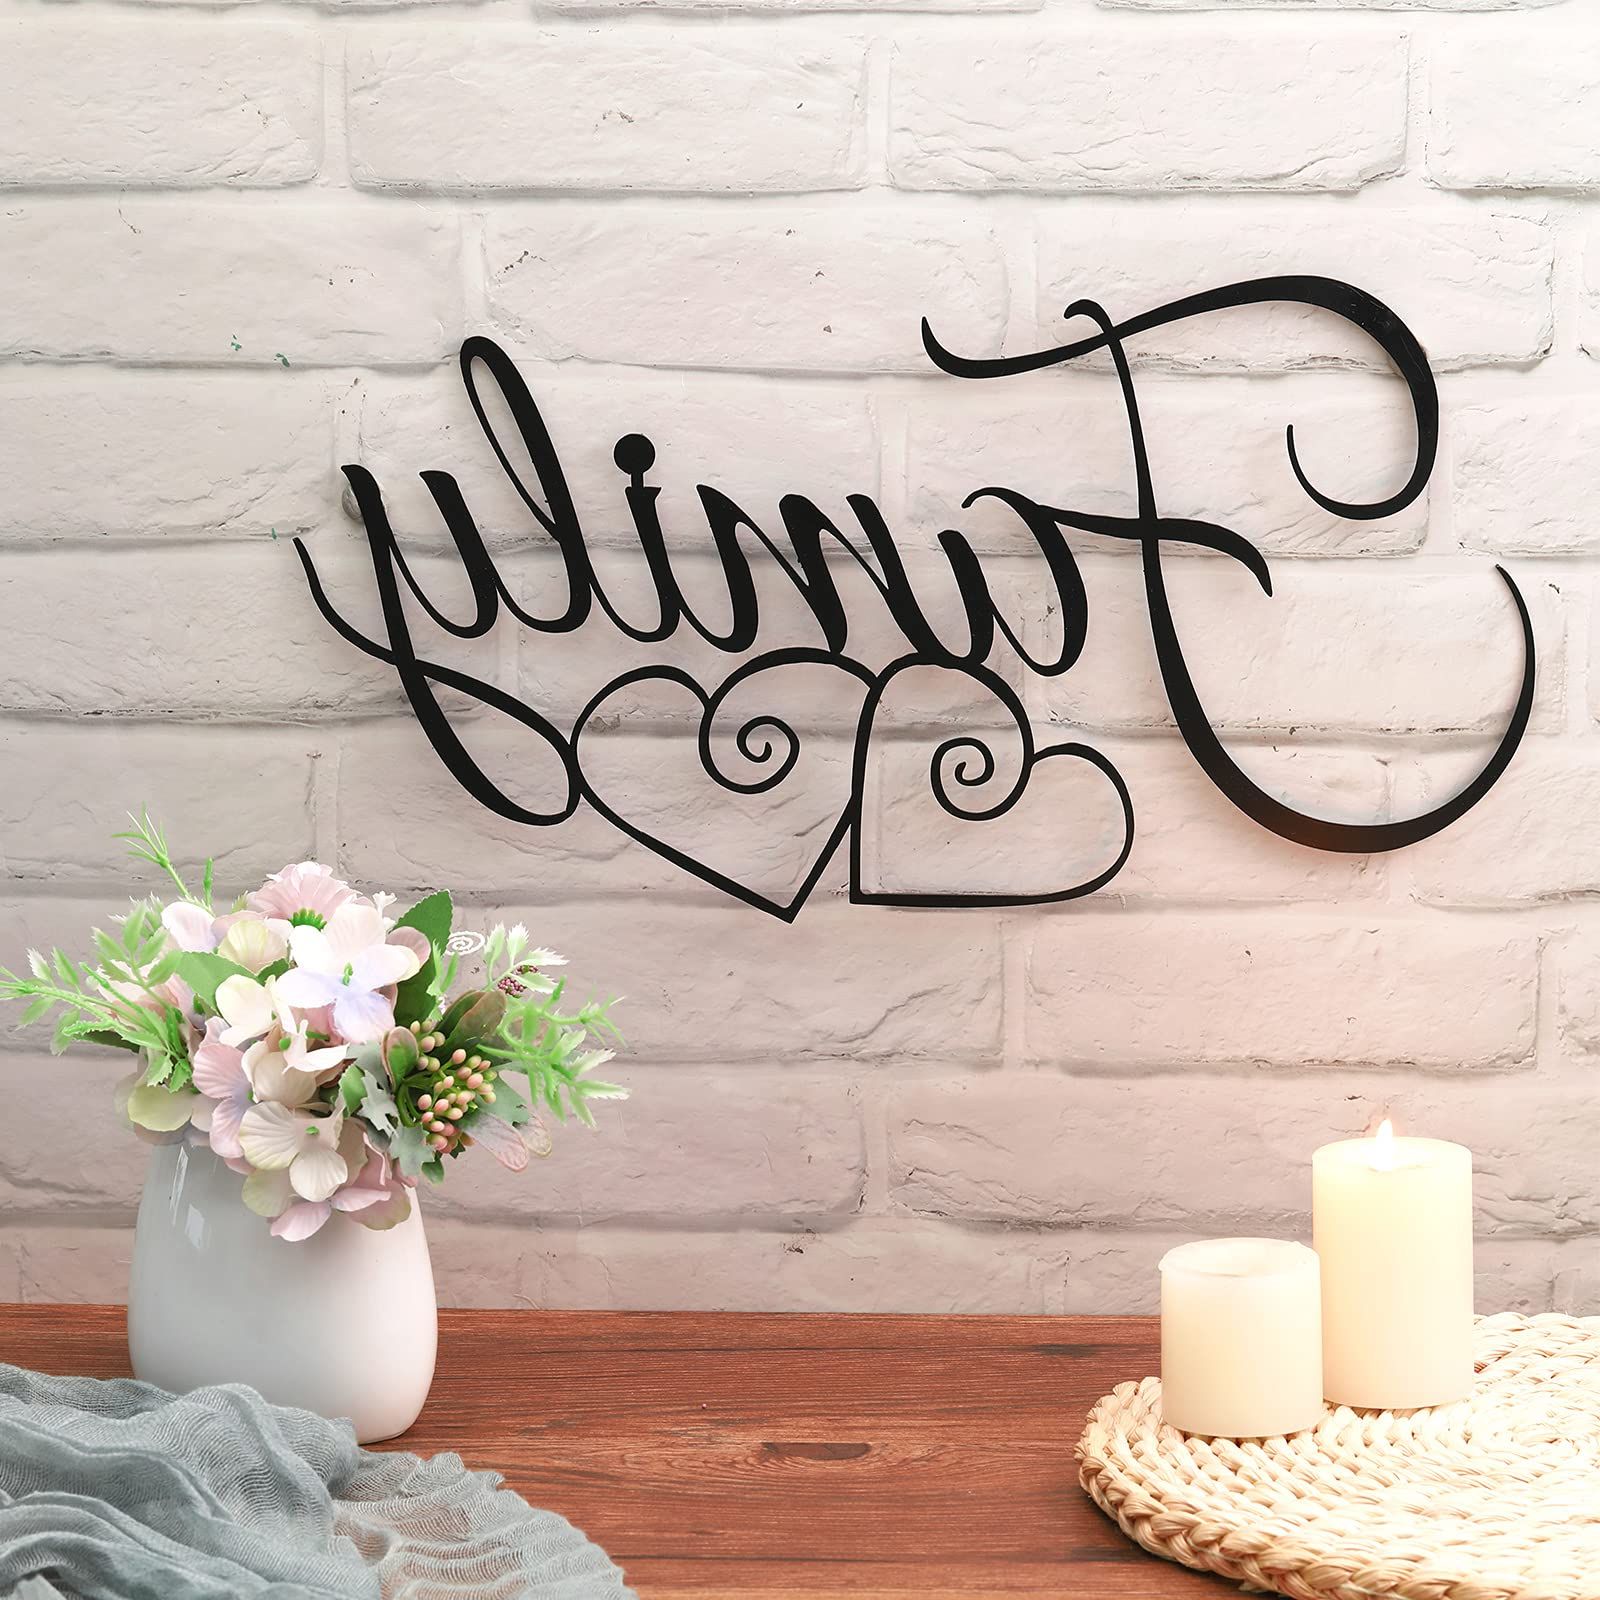 Popular Family Wall Sign Metal In Amazon: Family Wall Decor Sign Art Wall Hanging Decoration For Home  Dining Room Kitchen Door Decorations Wall Decor (black,metal): Home &  Kitchen (Photo 10 of 15)